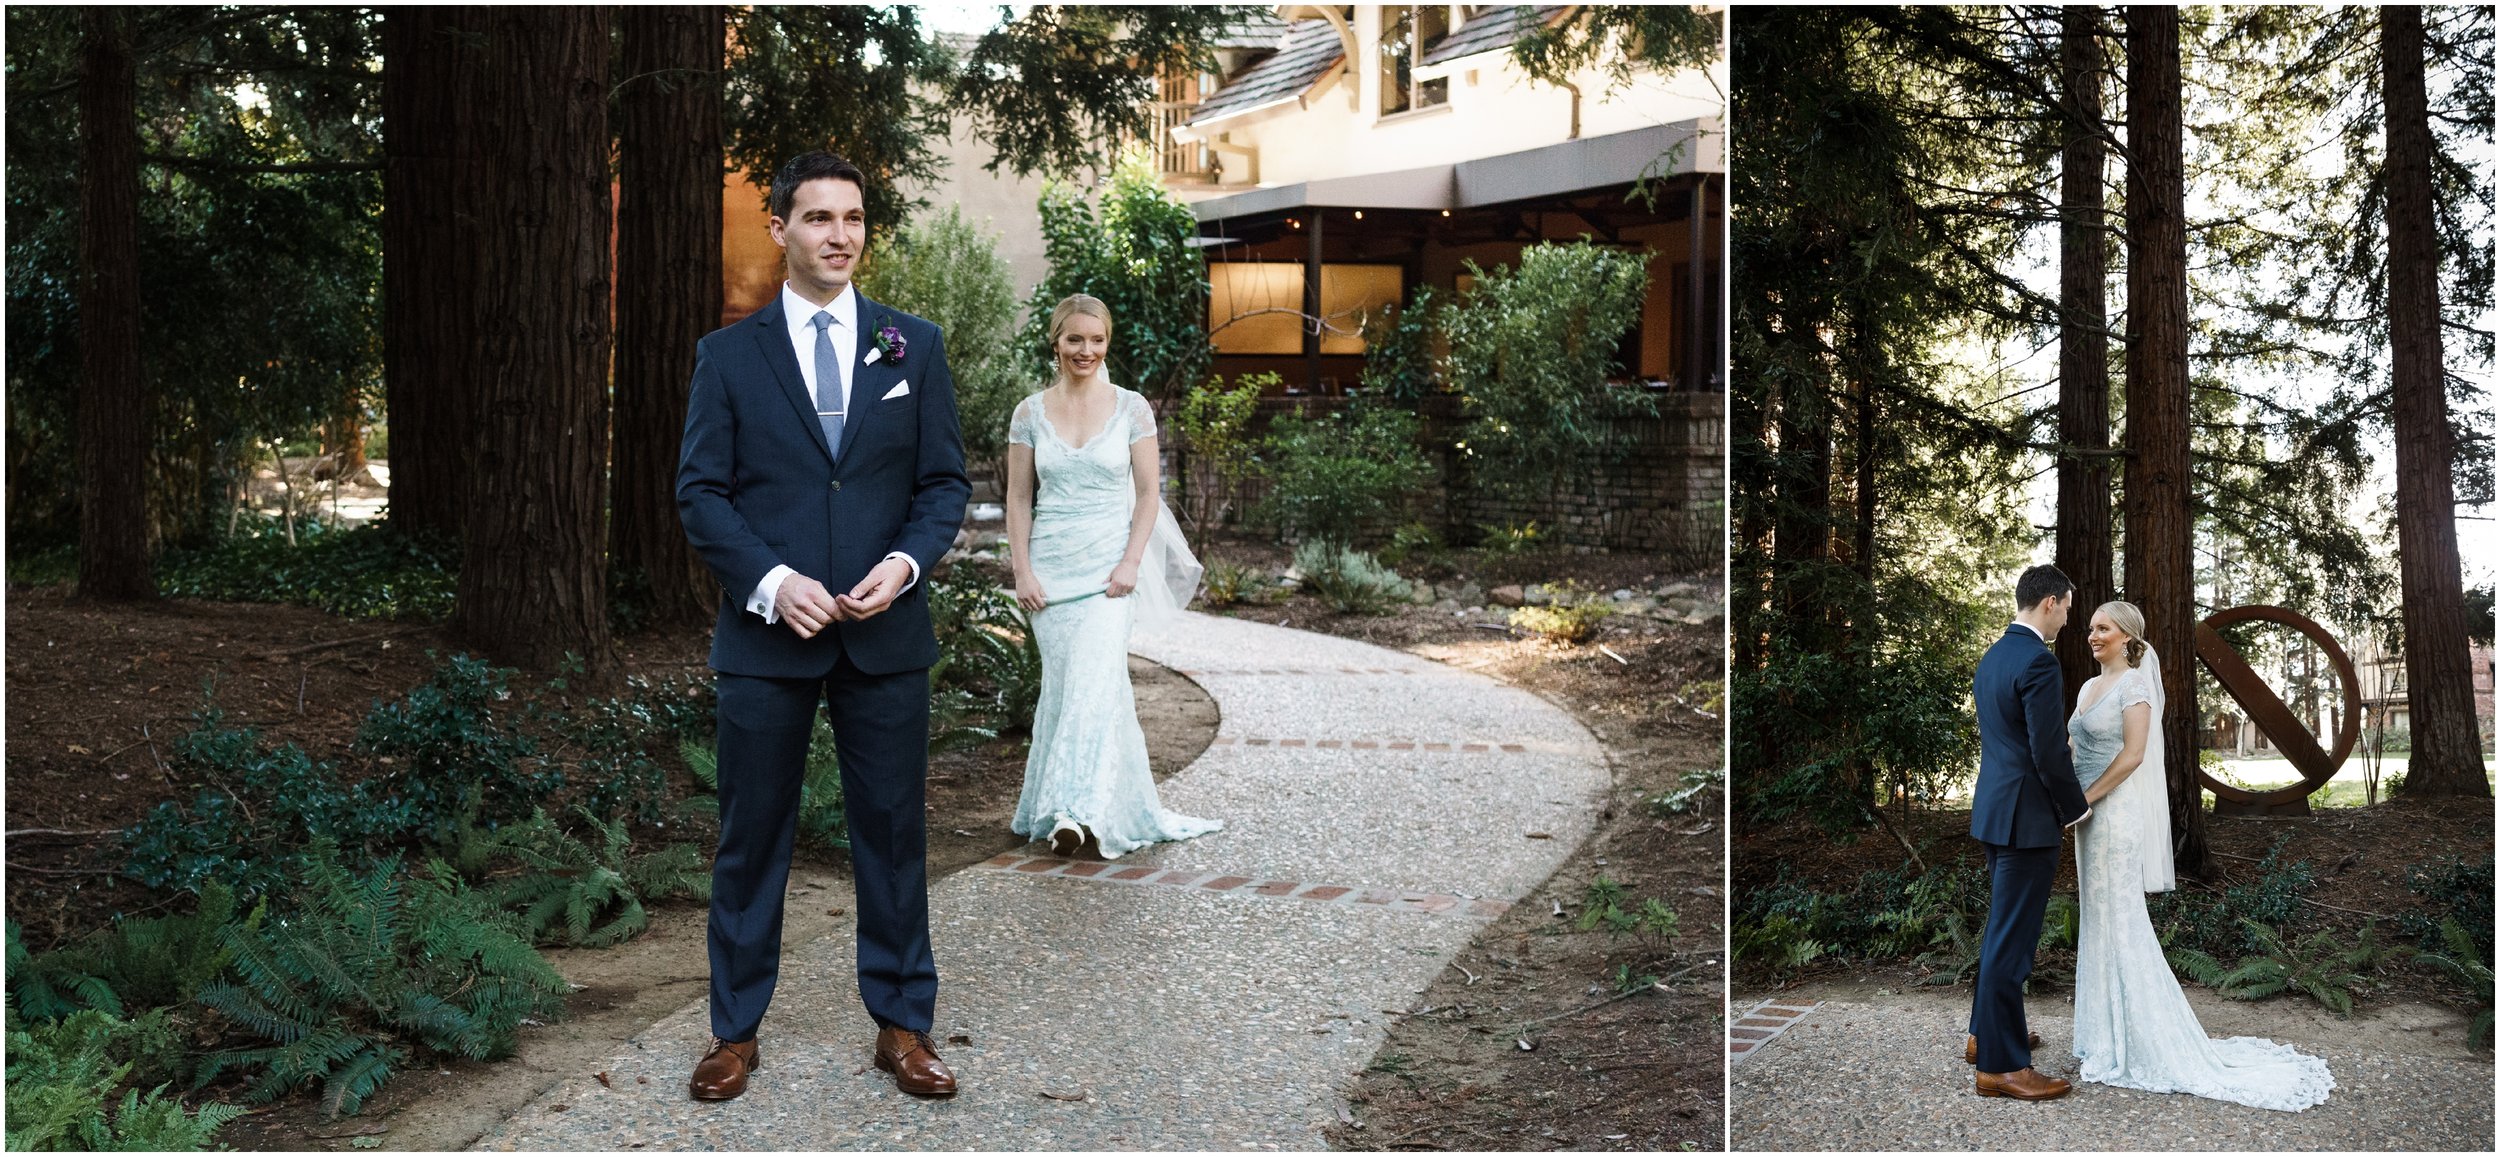 bride and groom's first look at the Harvest Inn in Napa Valley